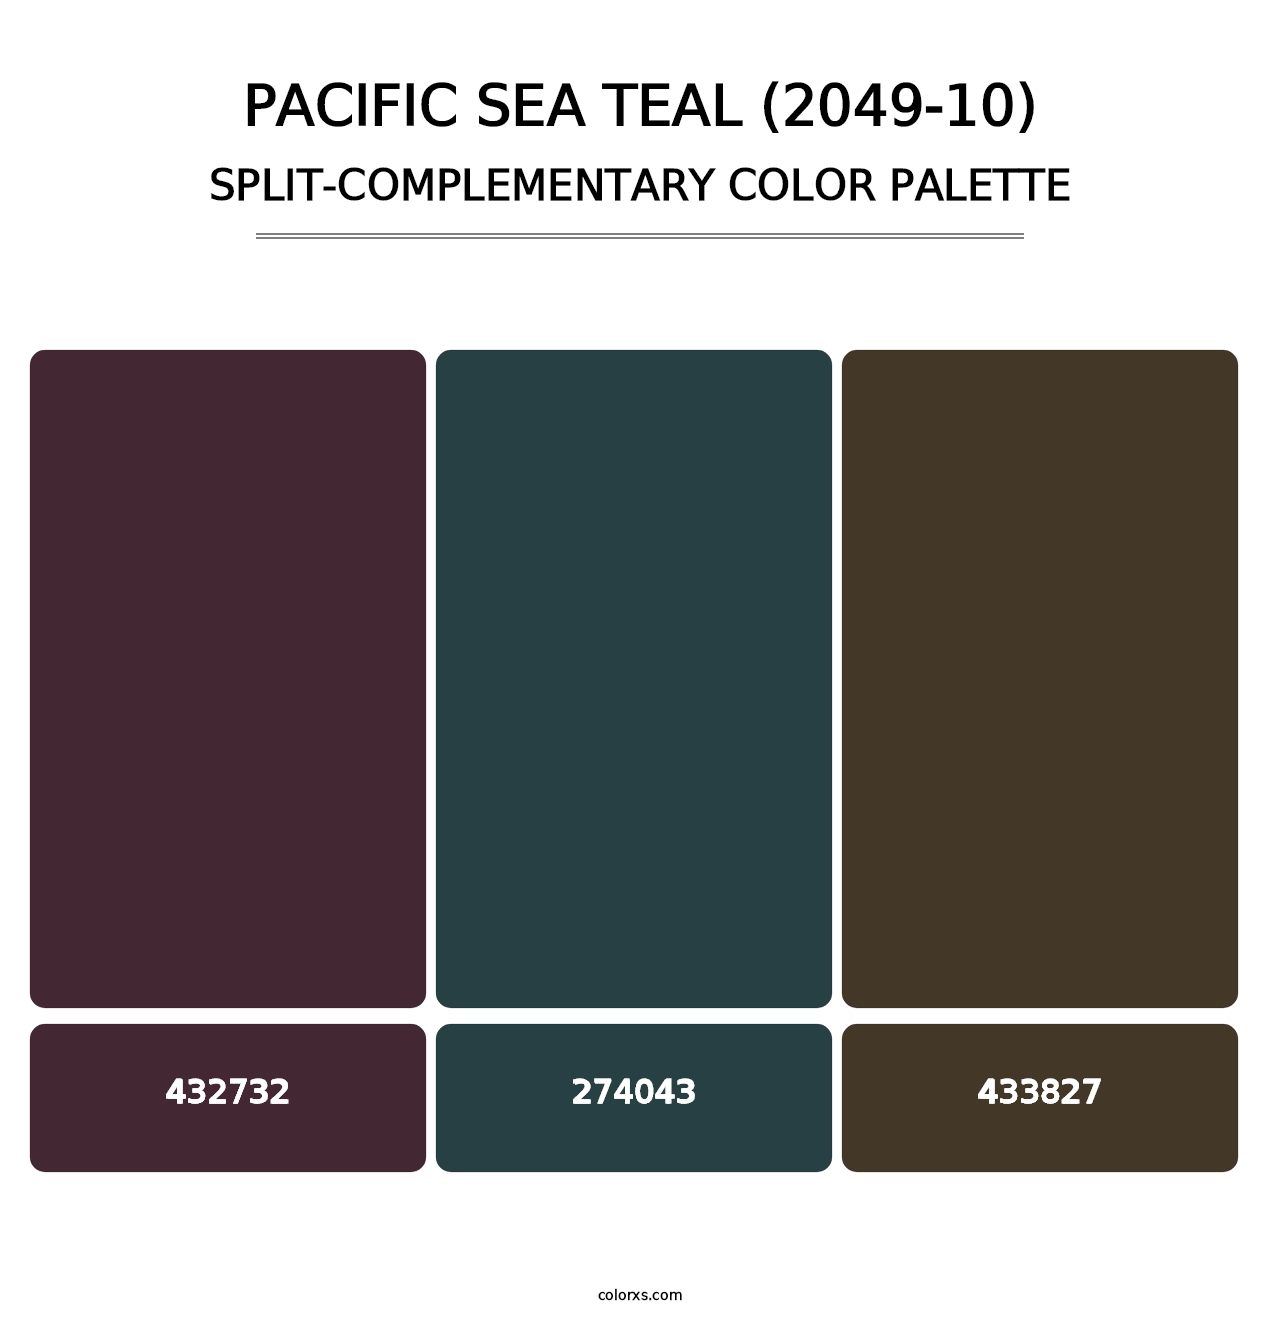 Pacific Sea Teal (2049-10) - Split-Complementary Color Palette